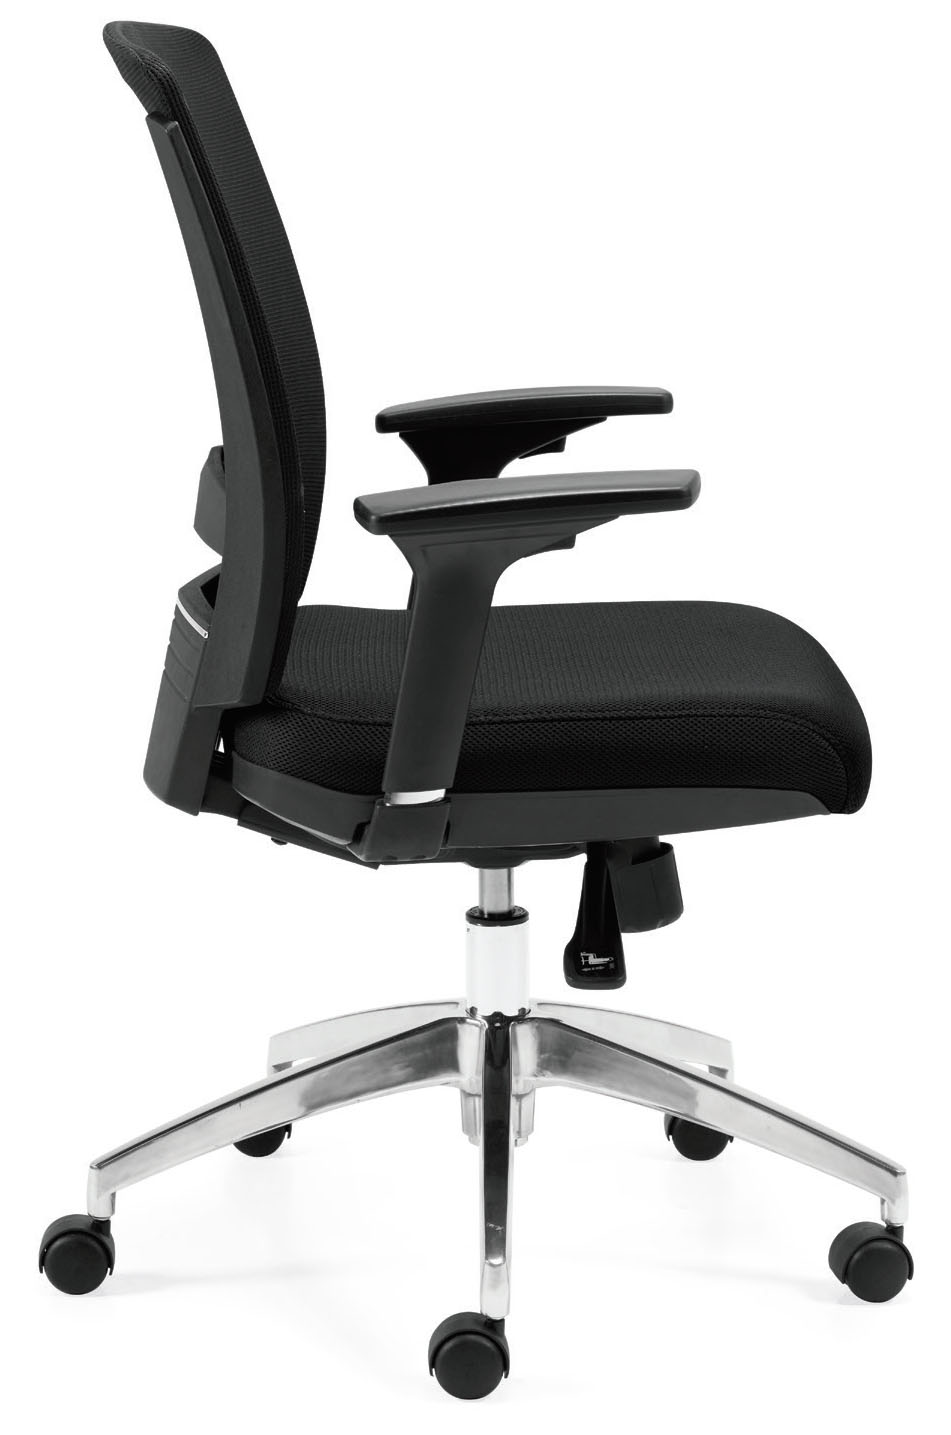 Offices To Go™ Mesh Executive Chair, OTG10904B